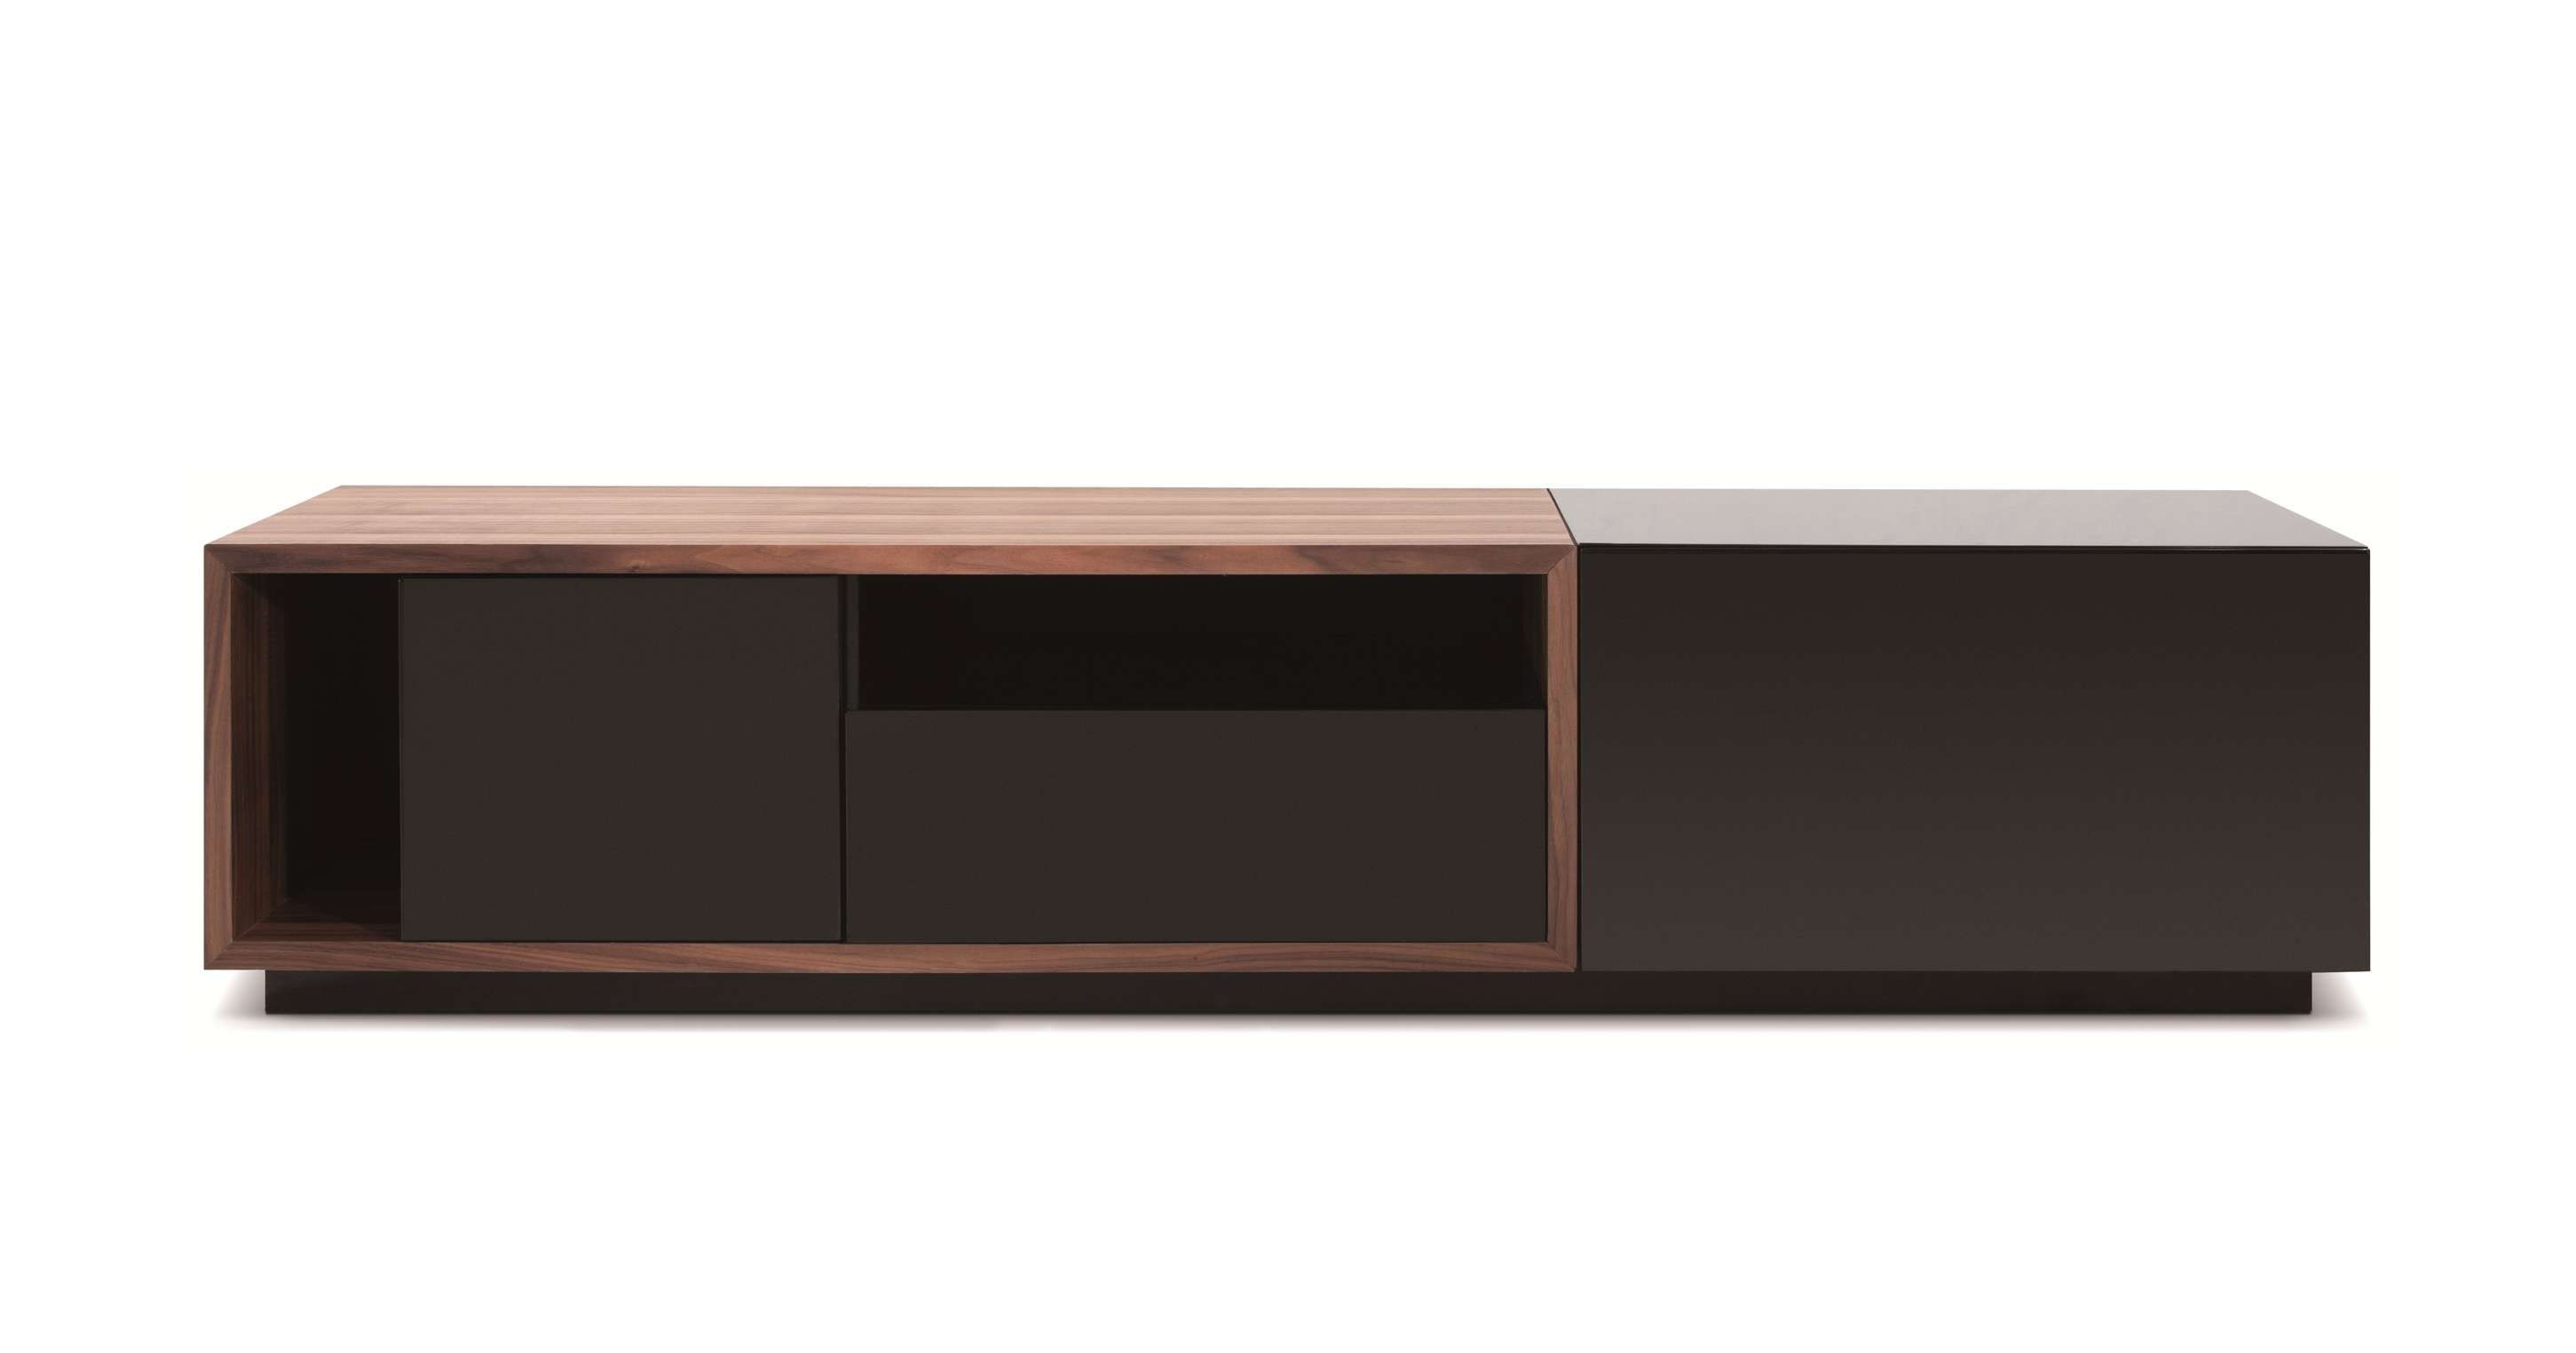 Tv047 Modern Tv Stand Intended For Contemporary Wood Tv Stands (Gallery 8 of 15)